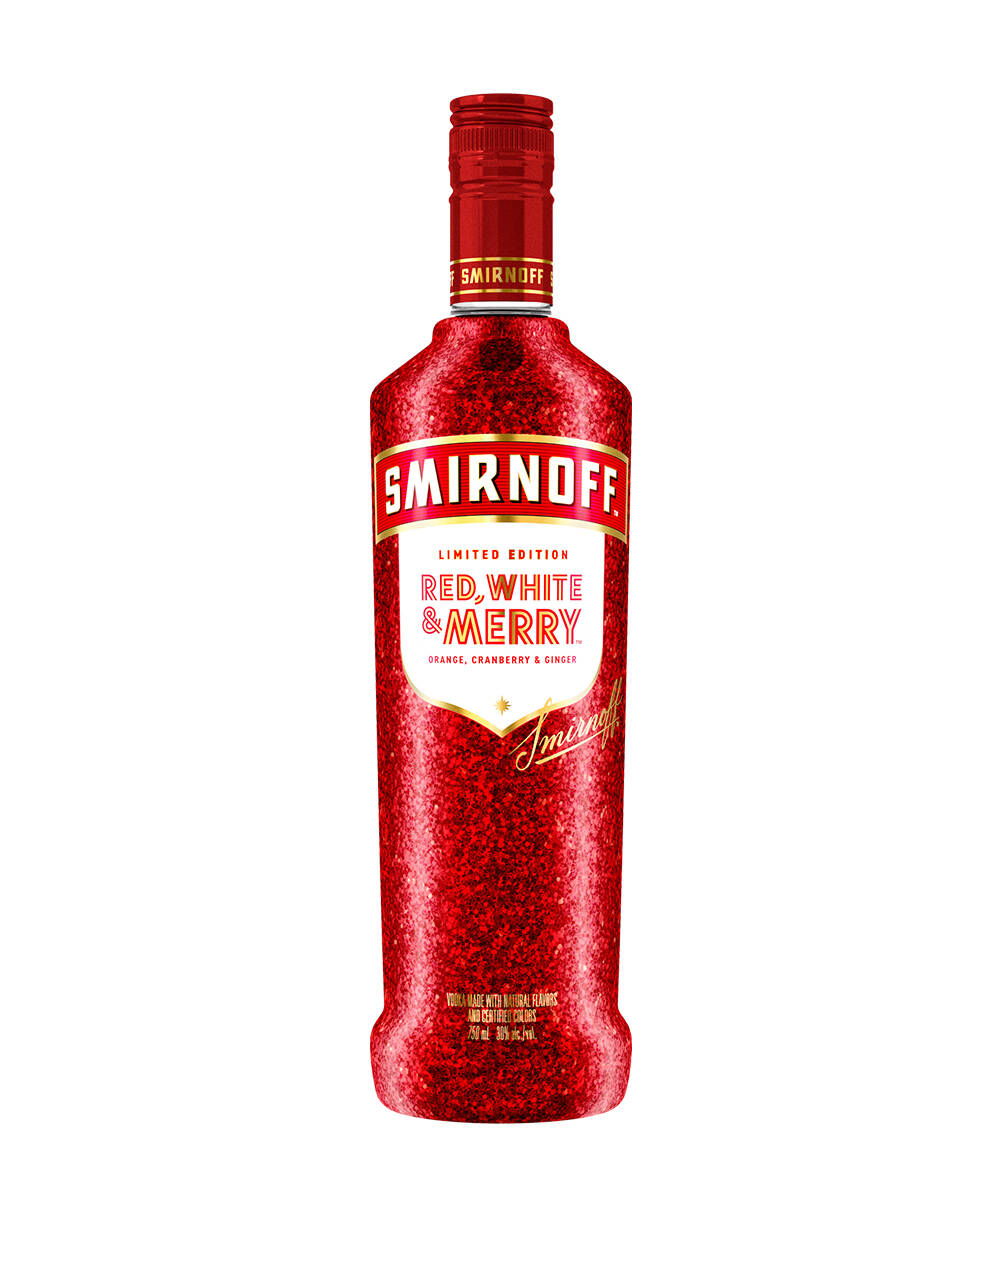 Smirnoff Red, White and Merry Limited Edition Flavored Vodka